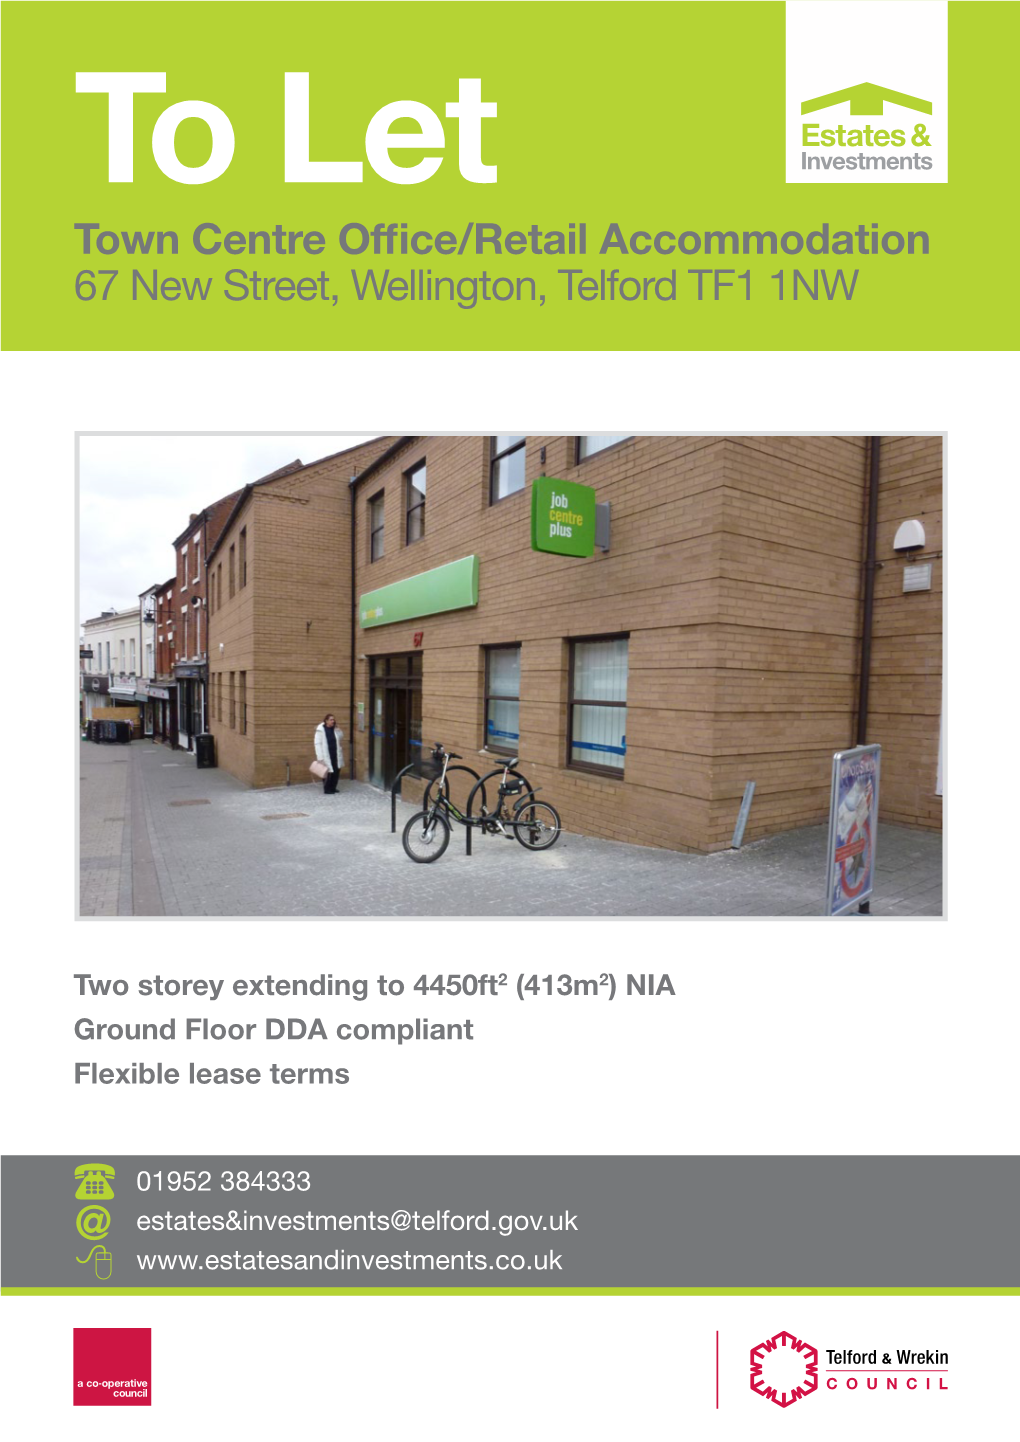 Town Centre Office/Retail Accommodation 67 New Street, Wellington, Telford TF1 1NW